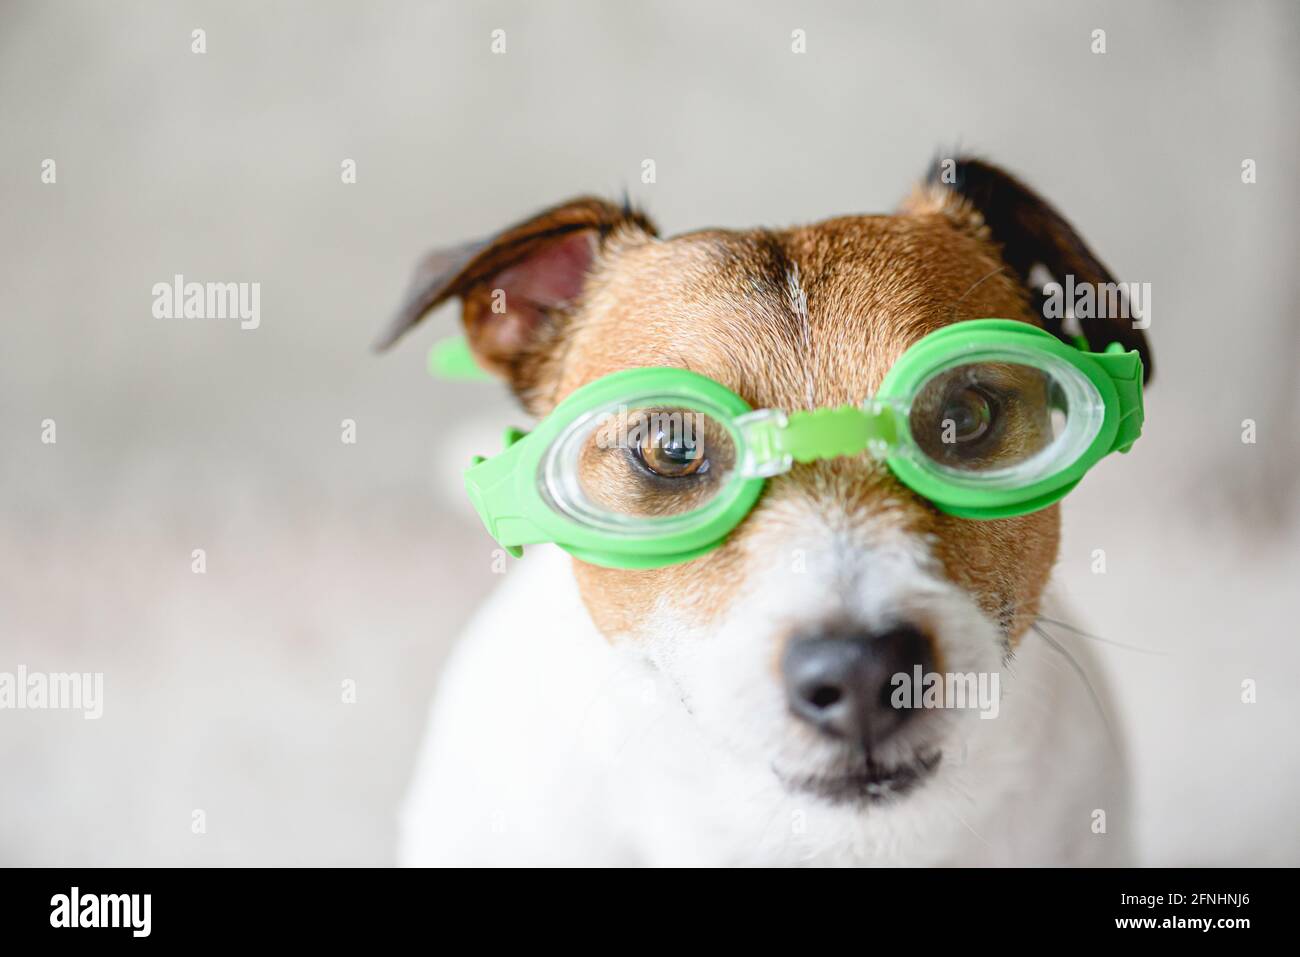 Funny dog wearing swimming glasses ready to dive underwater in pool Stock Photo